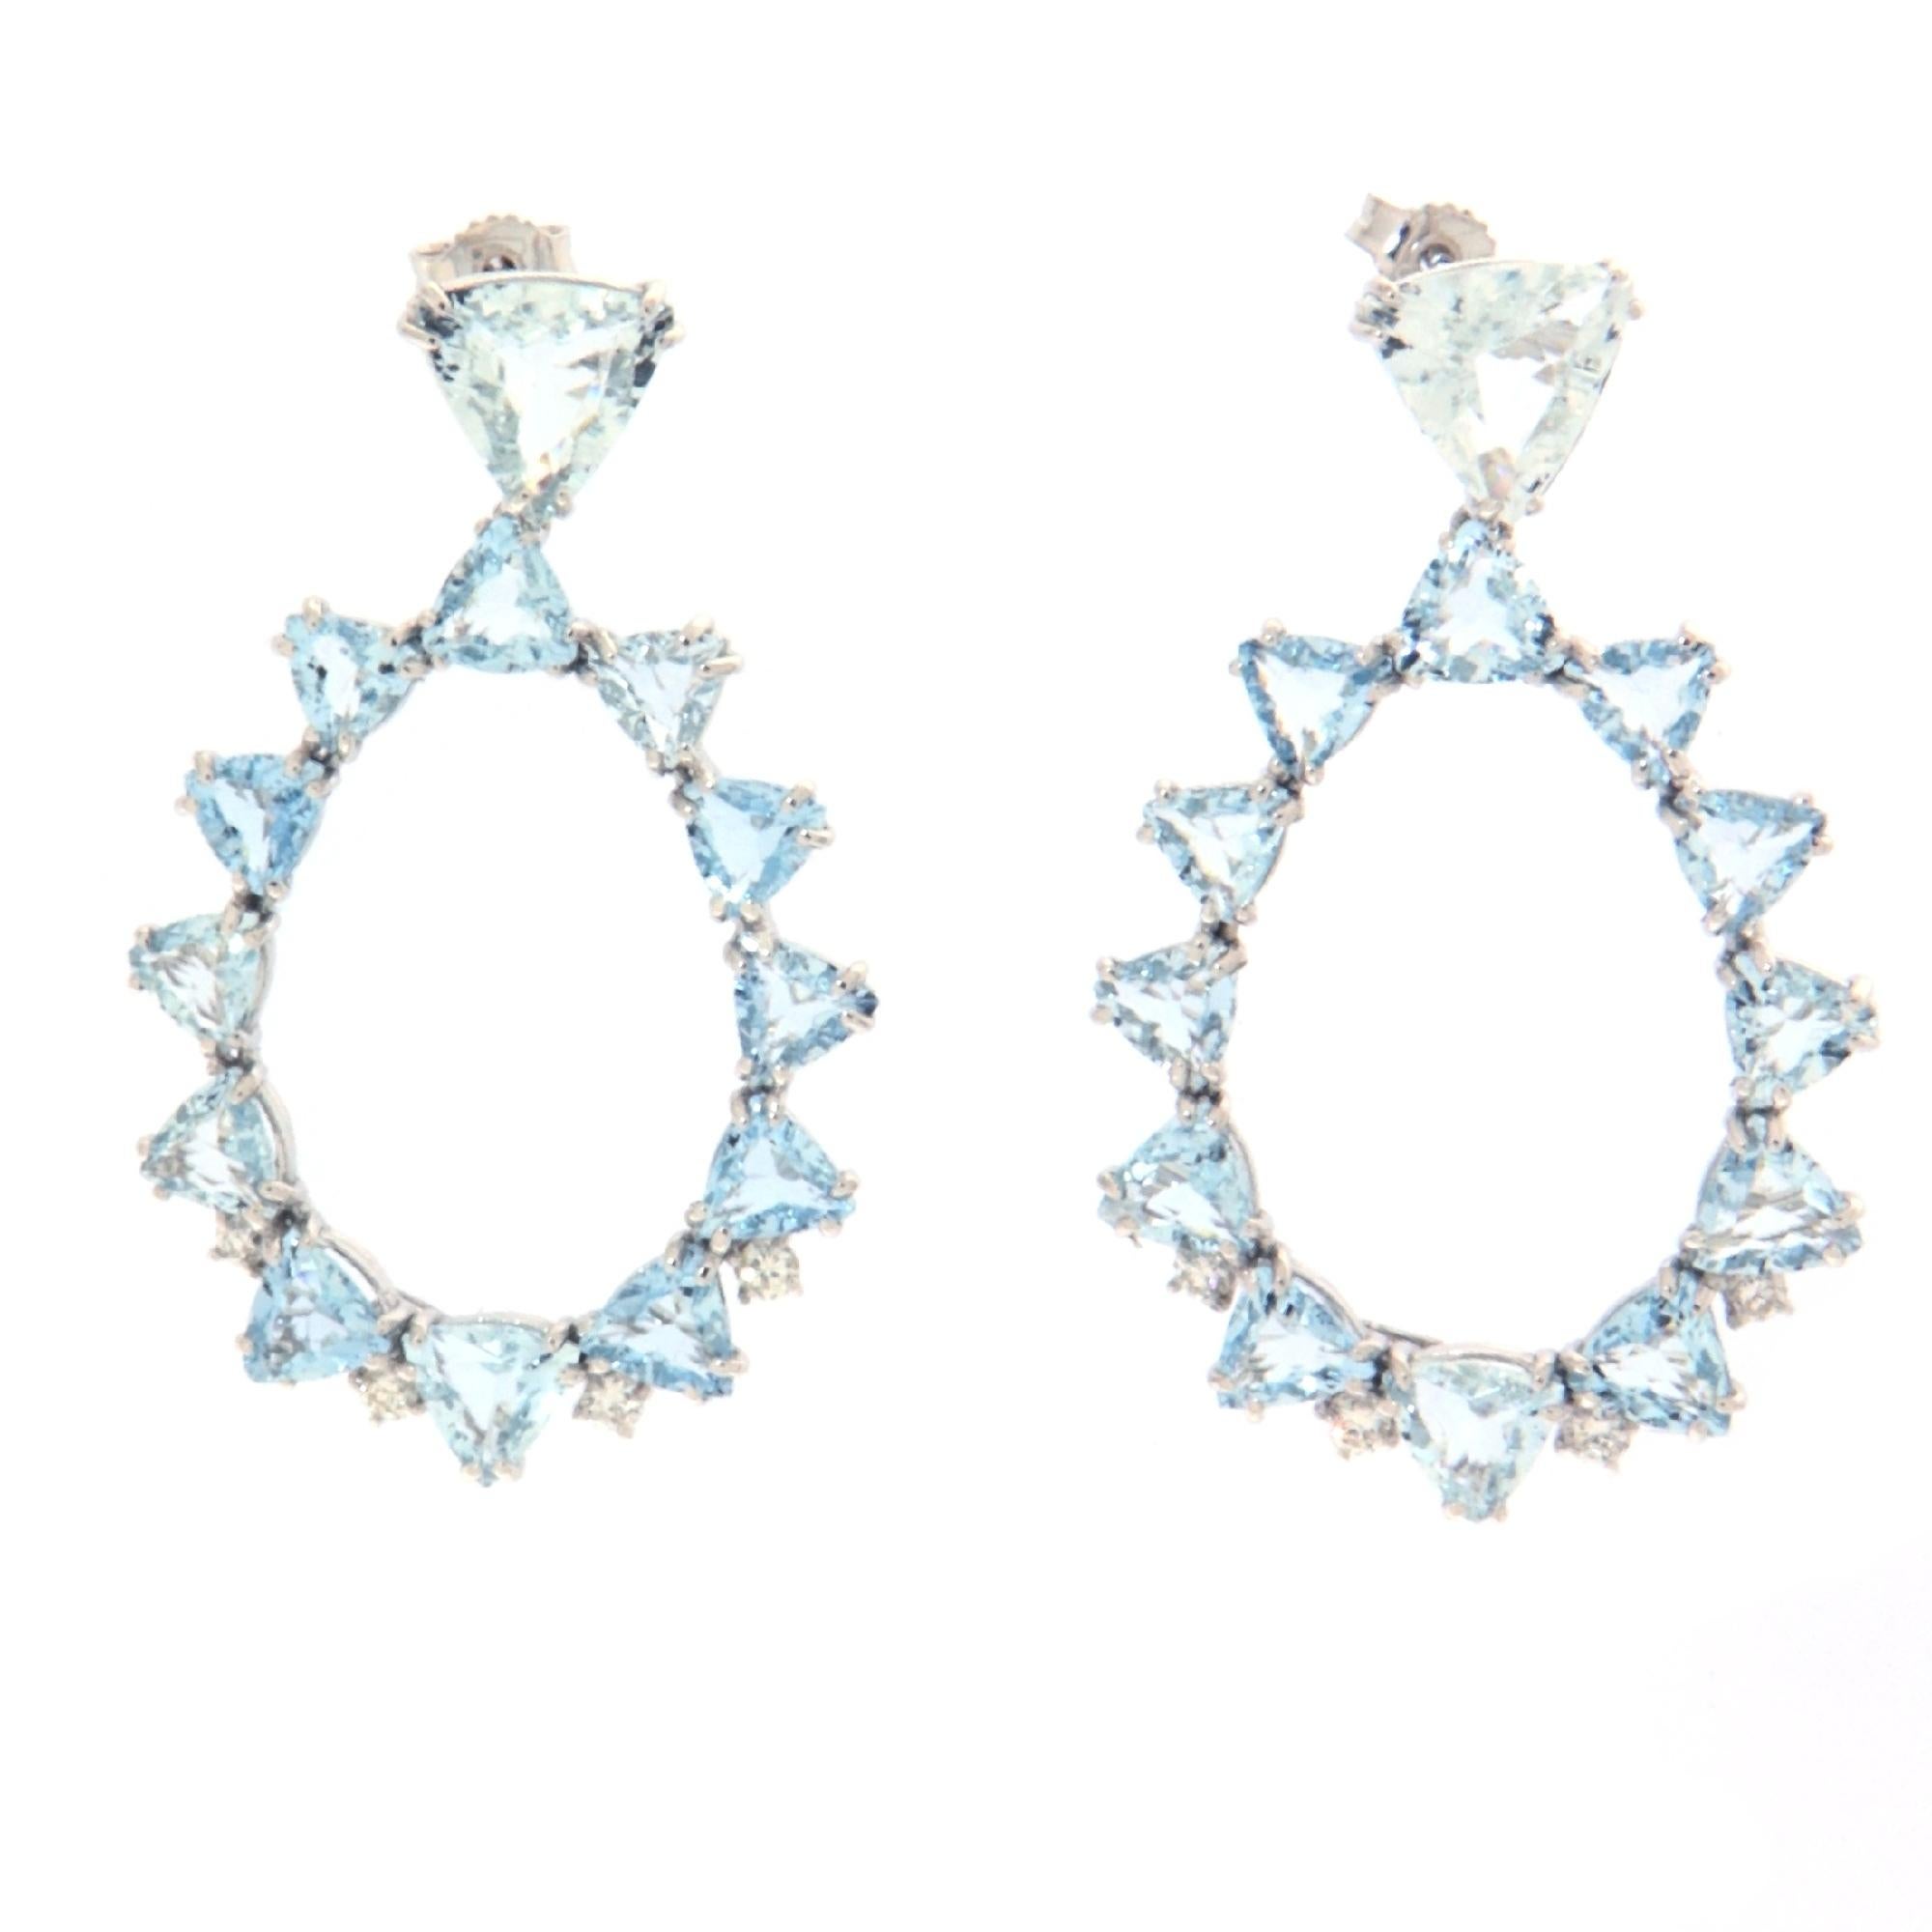 These exquisite earrings in 18-karat white gold embody the perfect blend of innovation and traditional jewelry craftsmanship. The white gold, chosen for its distinctive luster and ability to enhance the gems, sets the ideal stage for a remarkable